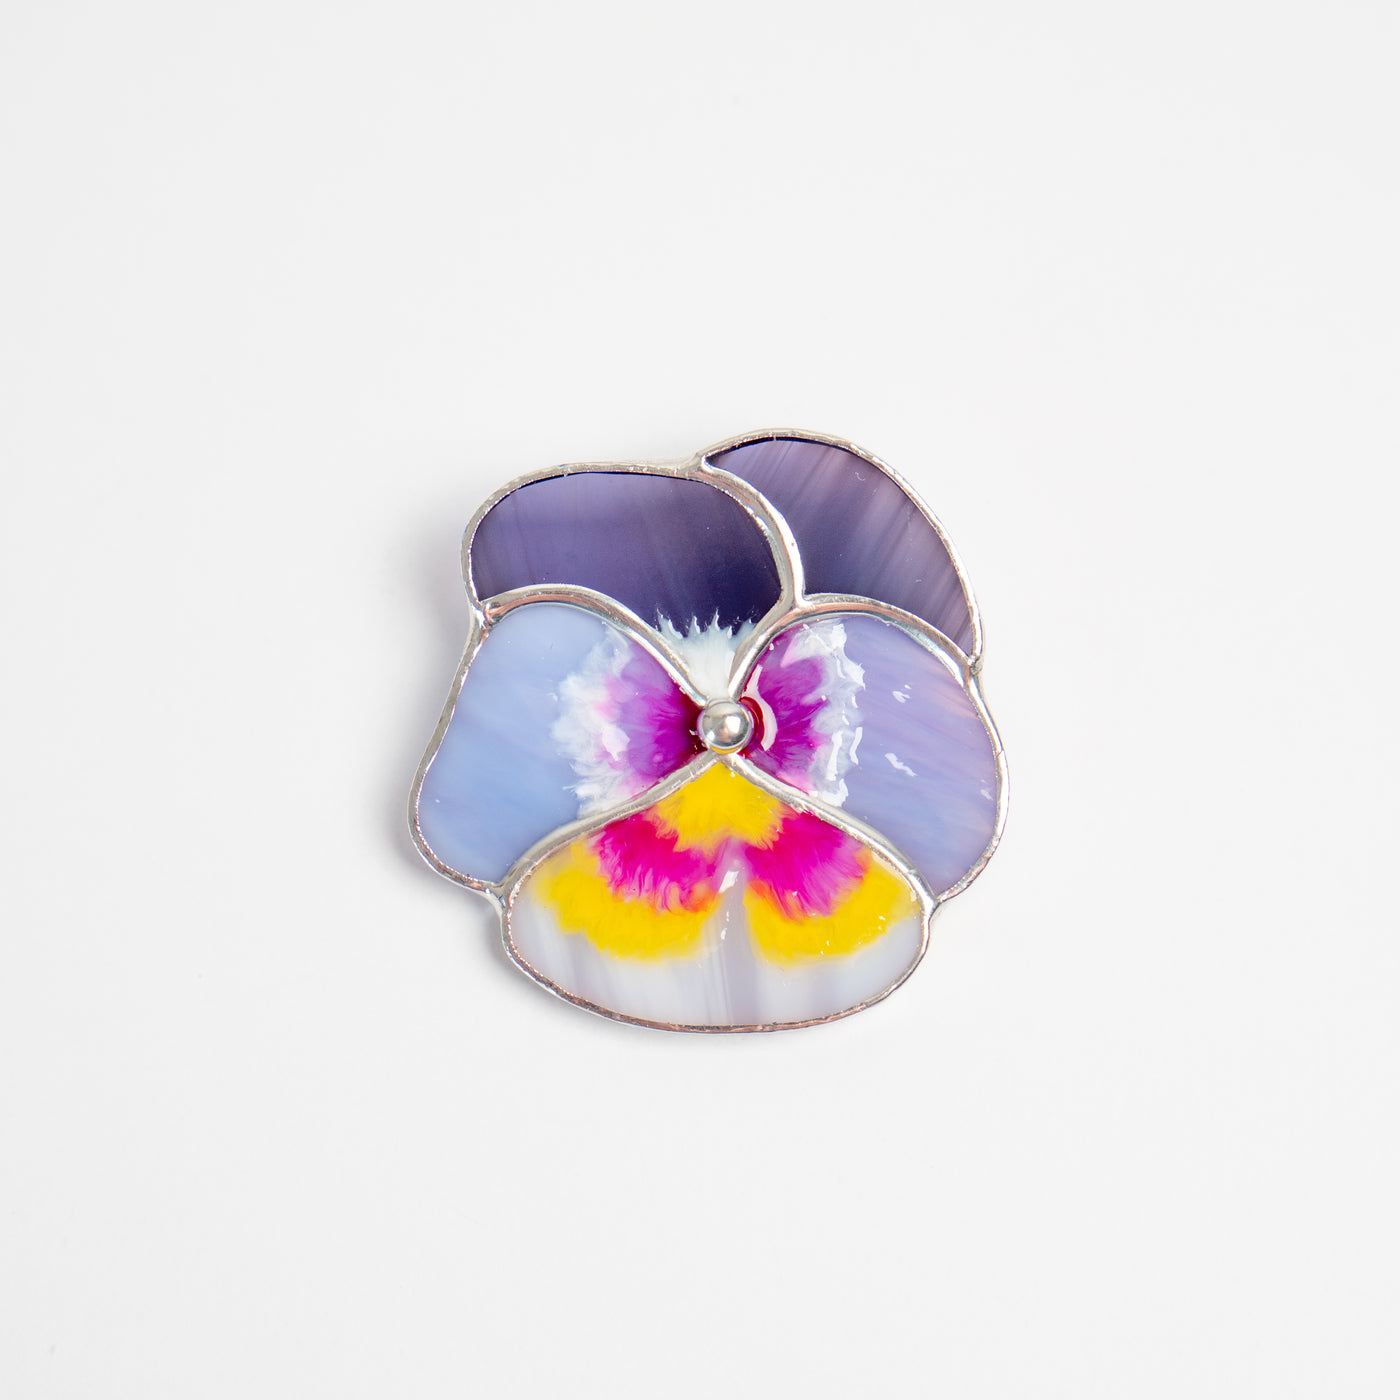 Stained glass different shades of purple with pink and yellow in the middle pansy brooch